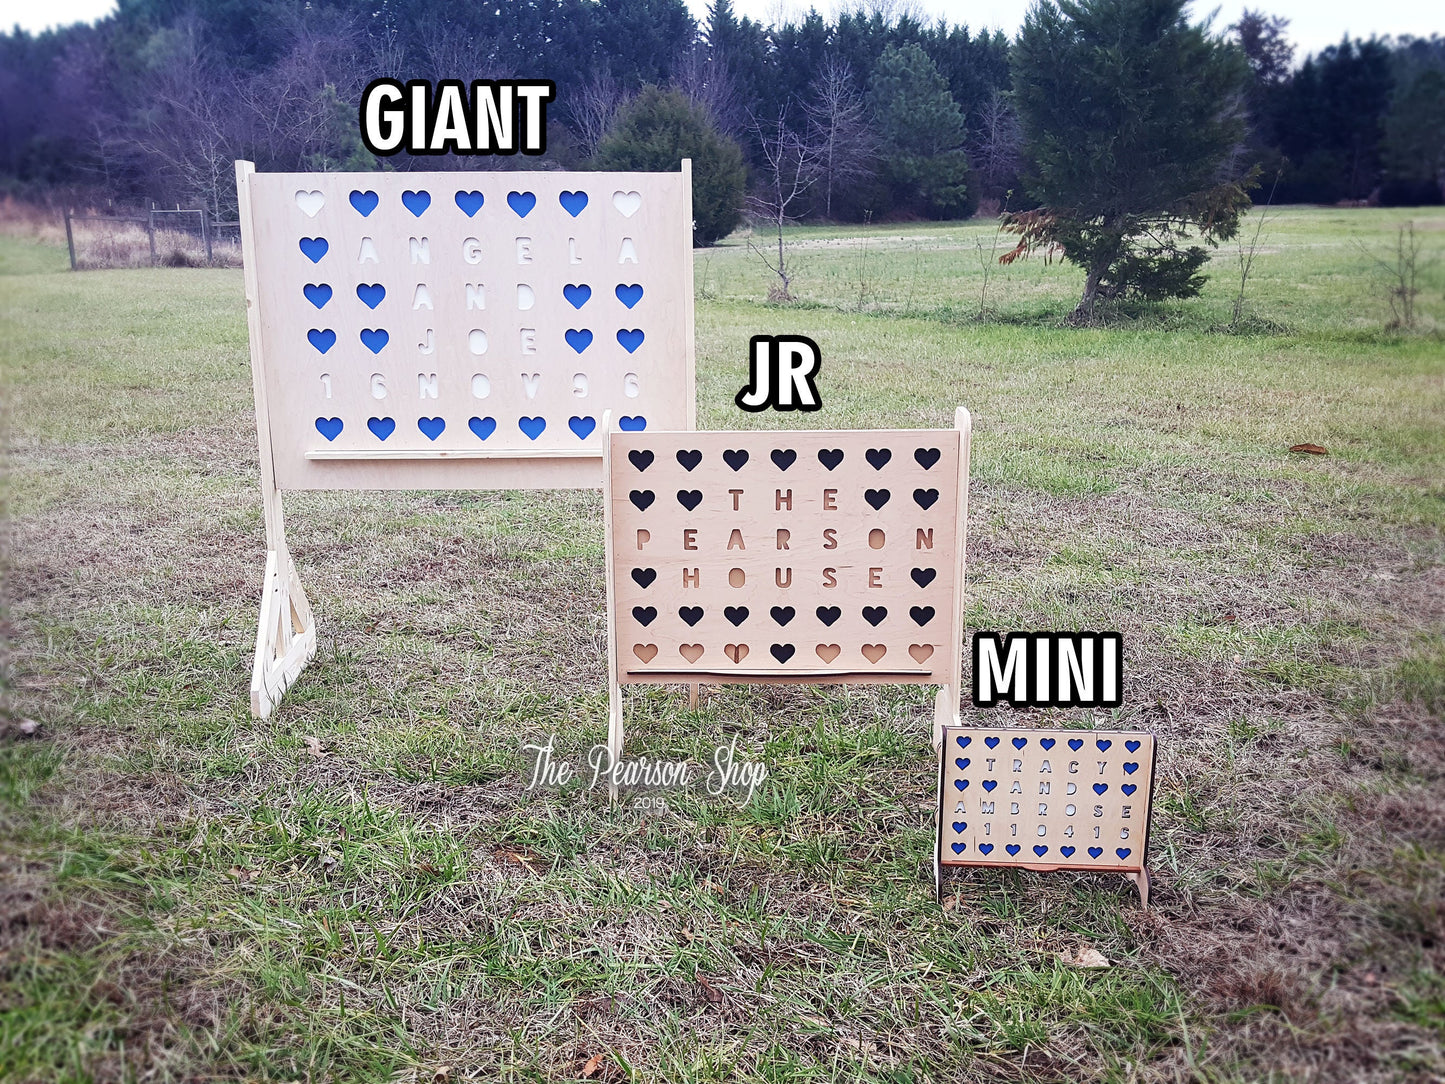 Connect 4 Giant or JR Personalized Hearts Game